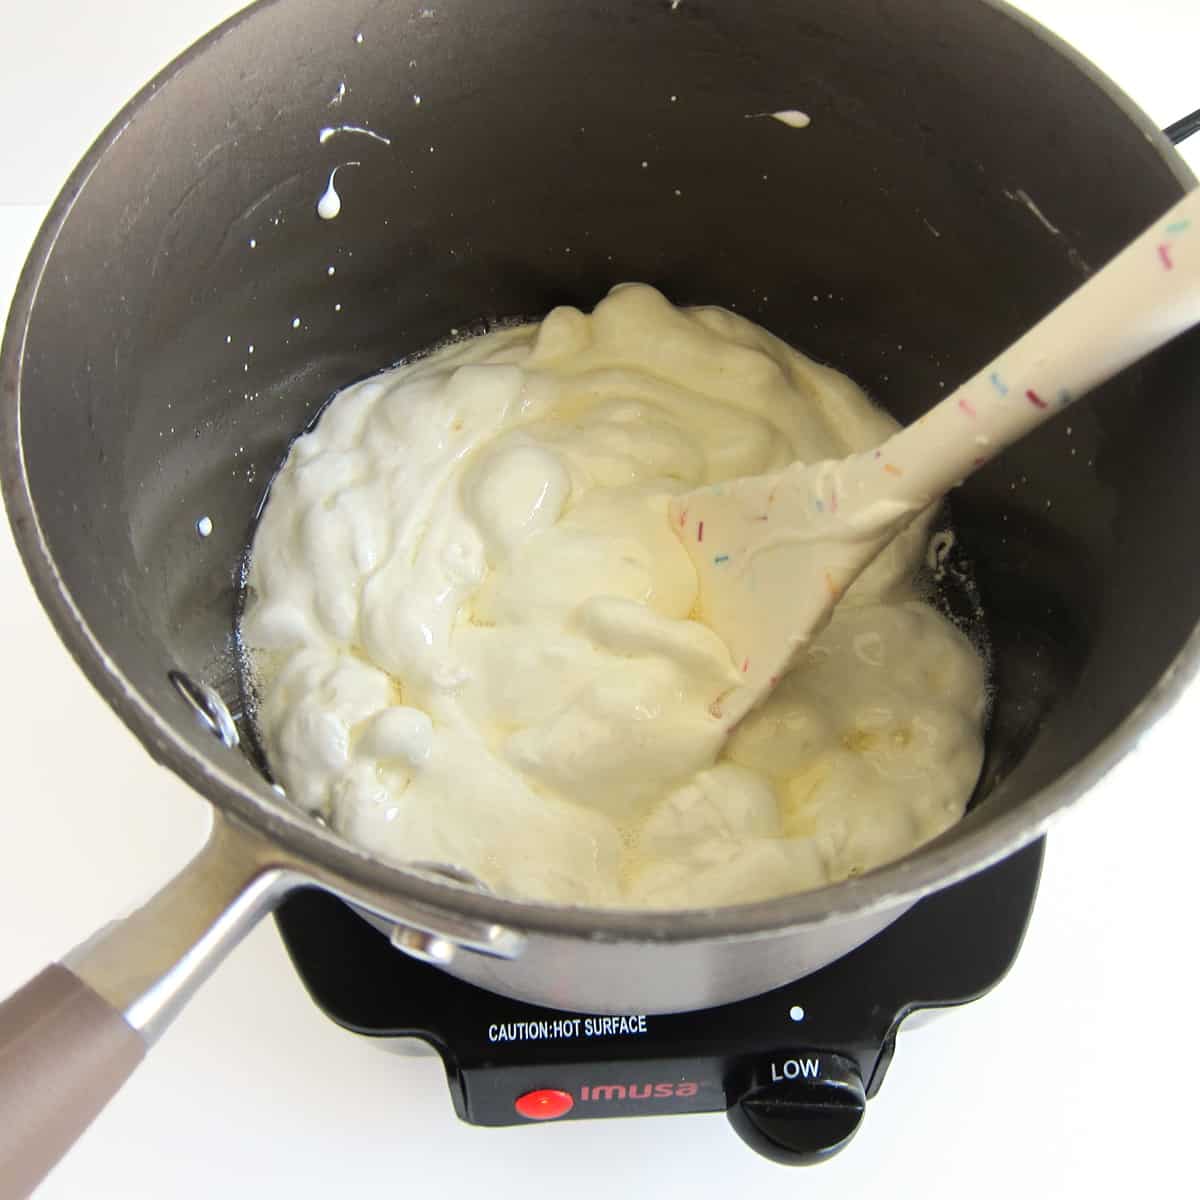 melting marshmallows with coconut oil in a non-stick saucepan set over low heat.